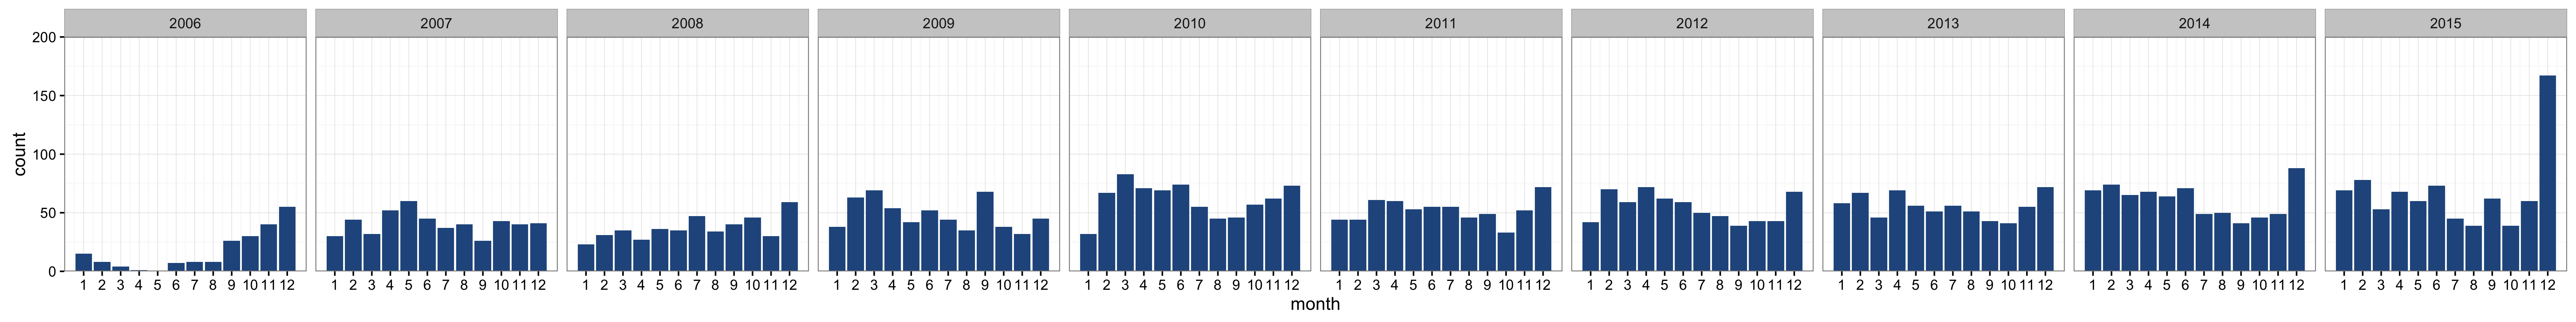 number of bids by month and year